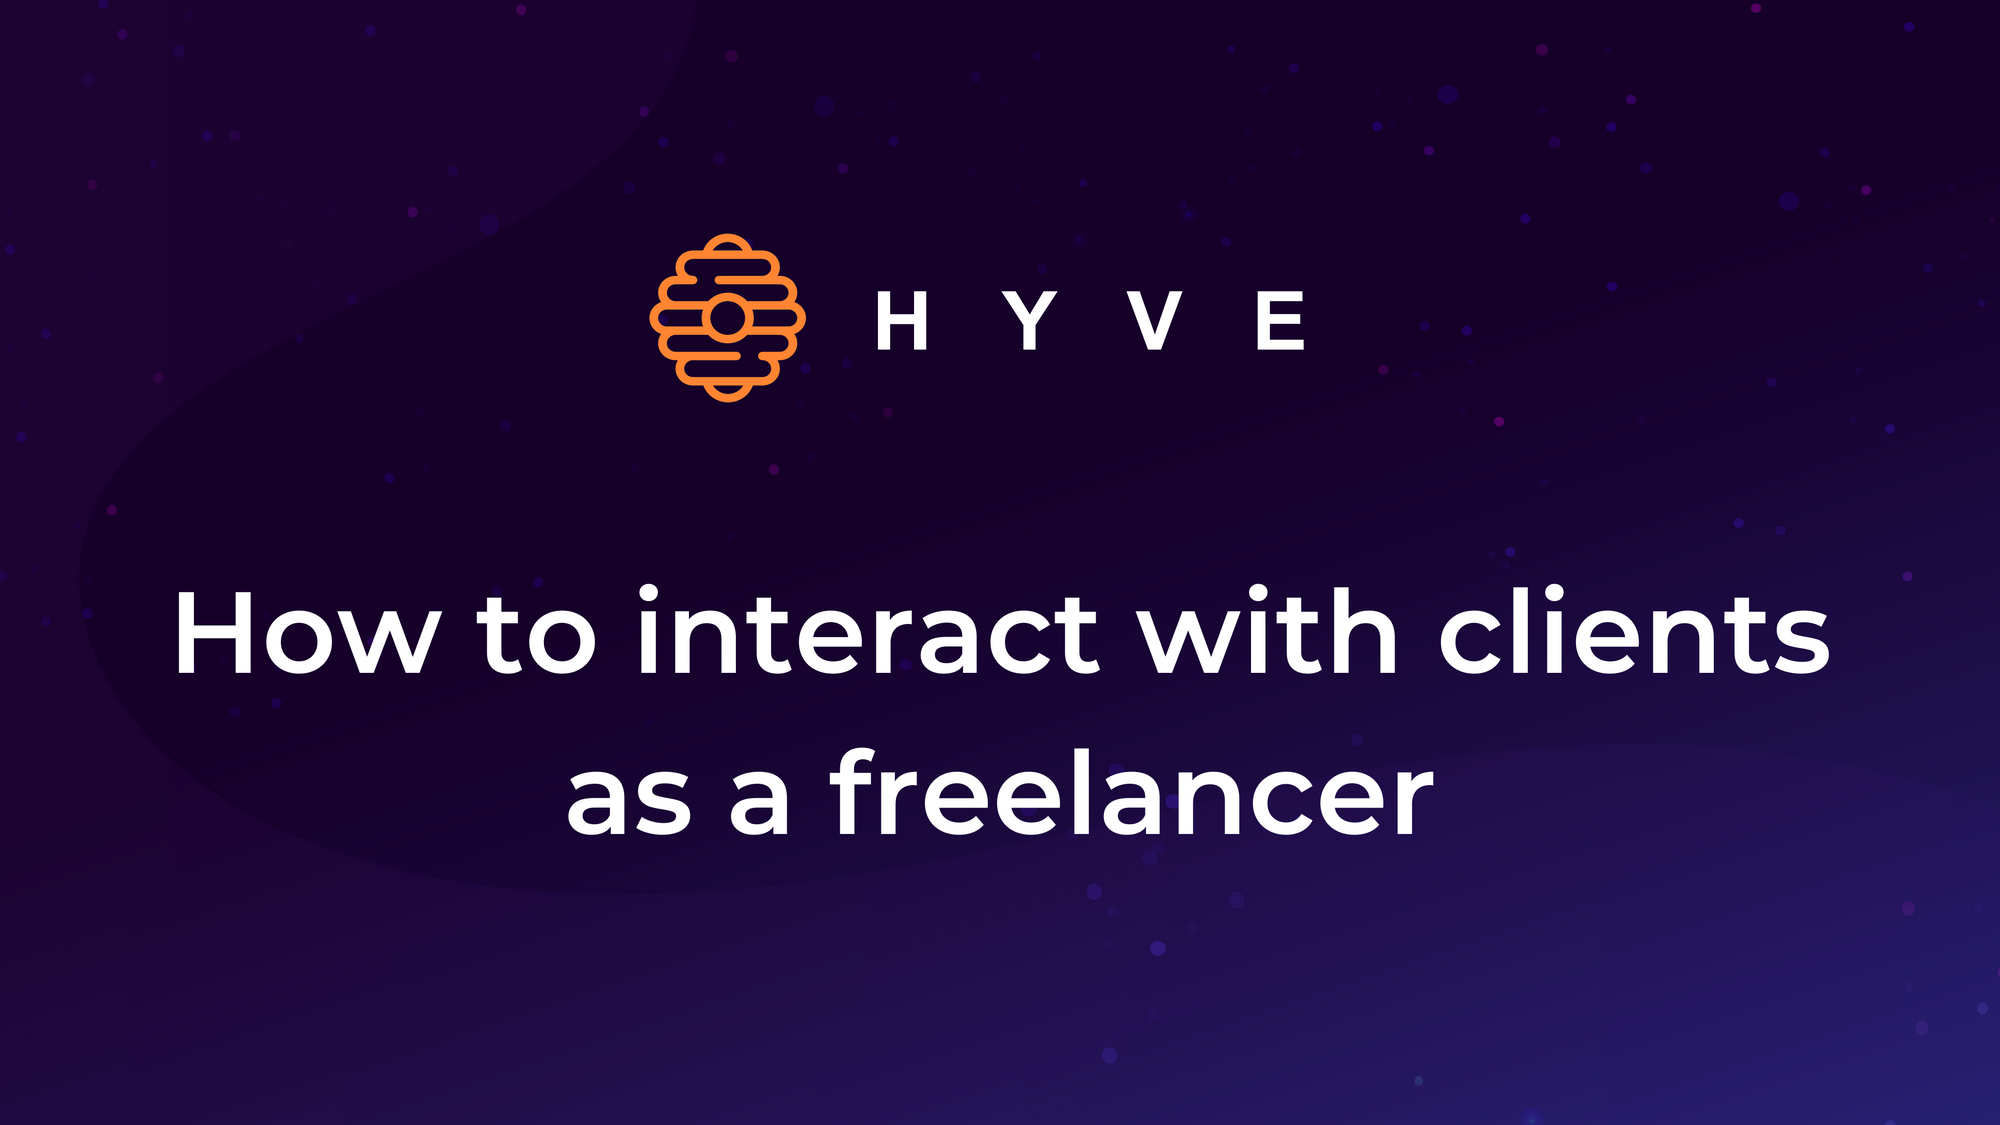 How to interact with clients as a freelancer